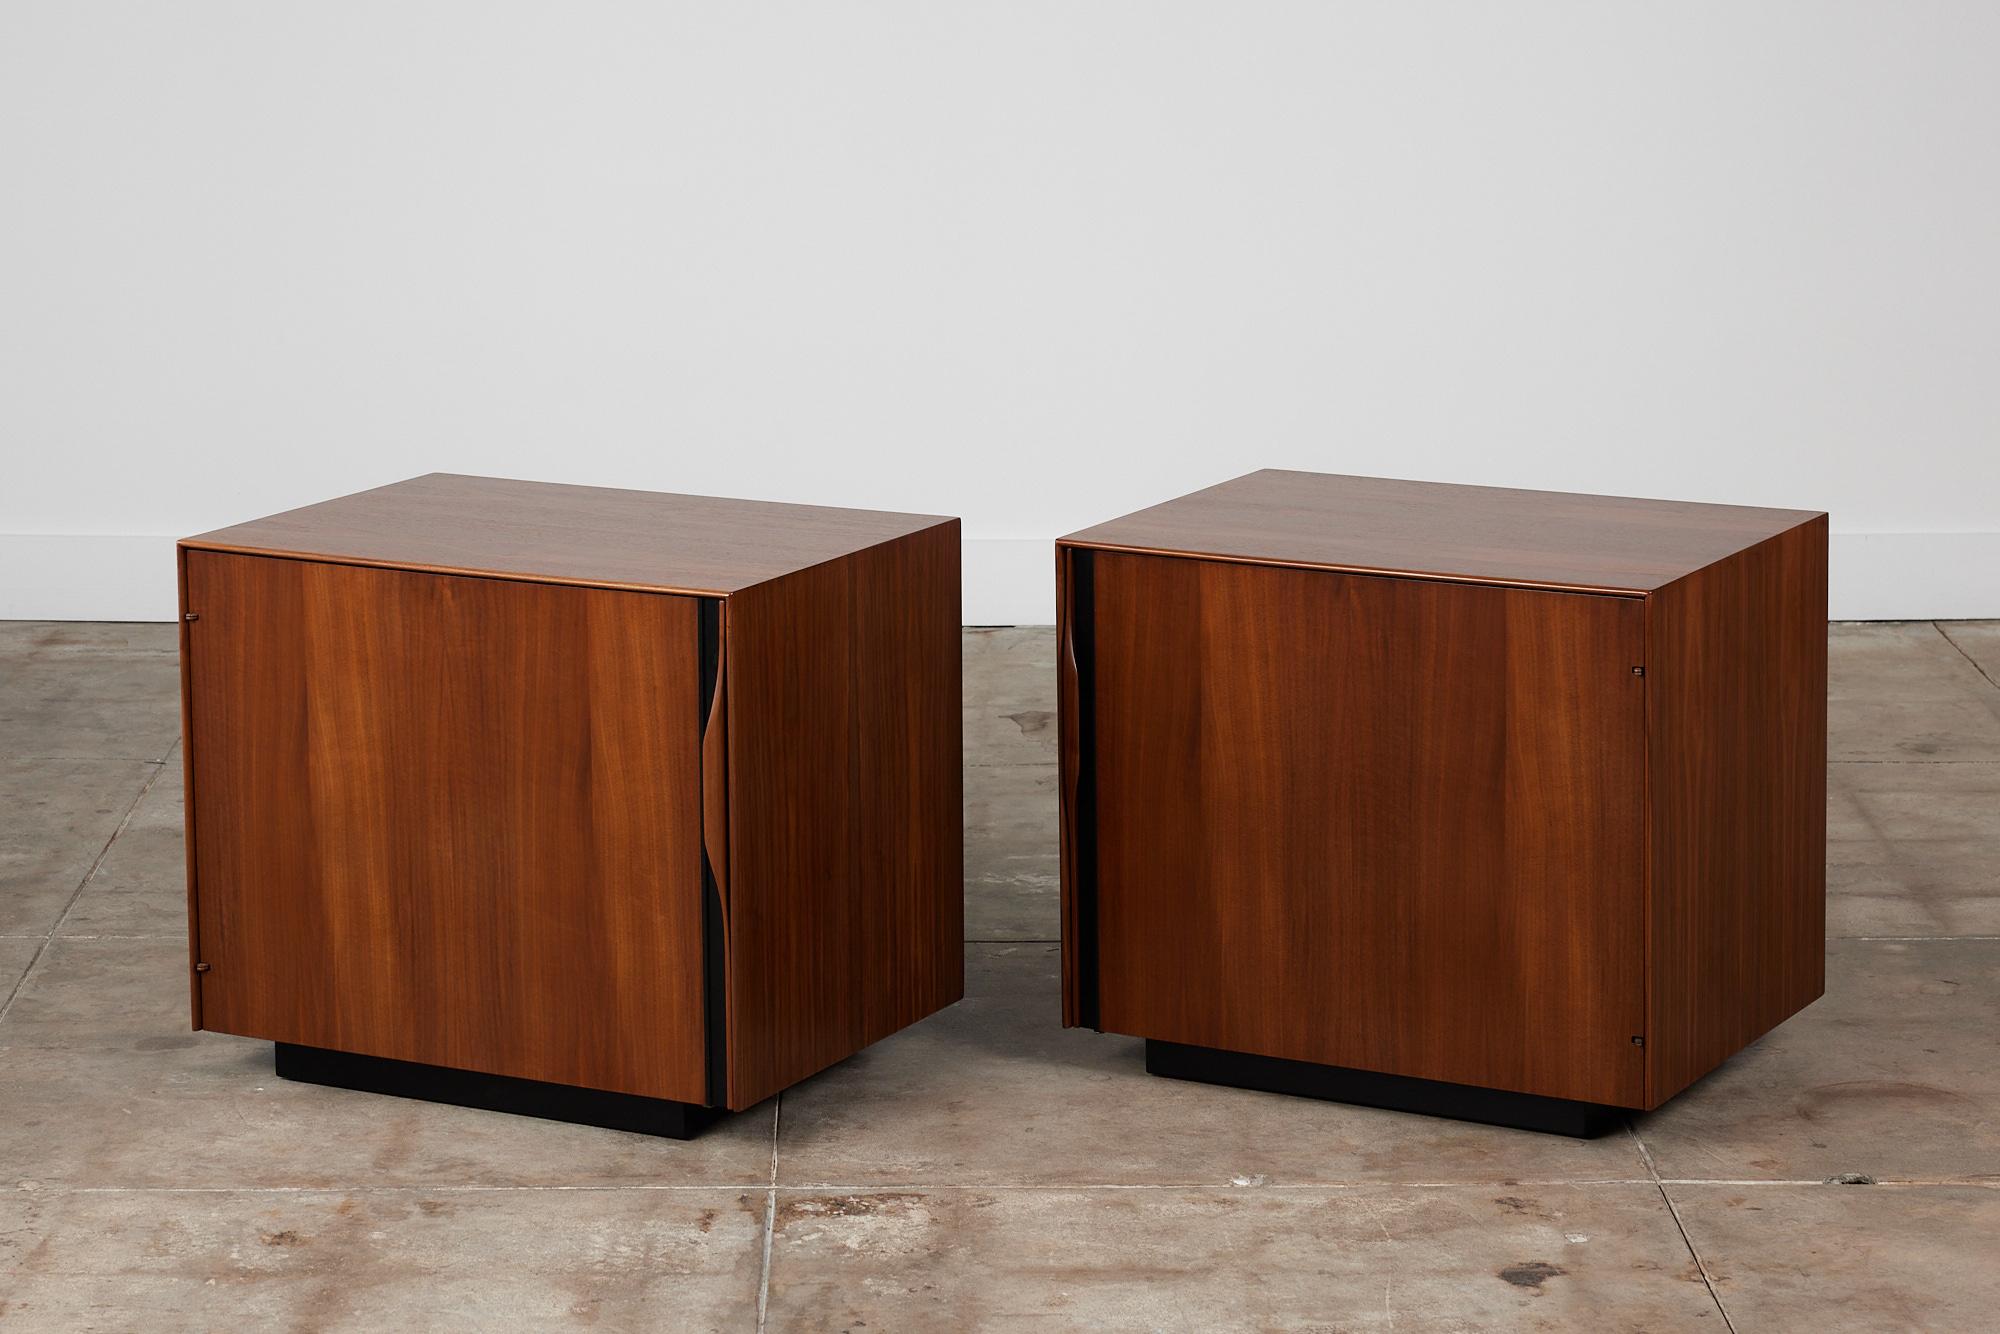 Pair of walnut nightstands by John Kapel for Glenn of California, circa 1960s, USA. The nightstands each feature a single door front with sculpted handles and black linear detailing. The hinged doors open to reveal magazine storage on the door